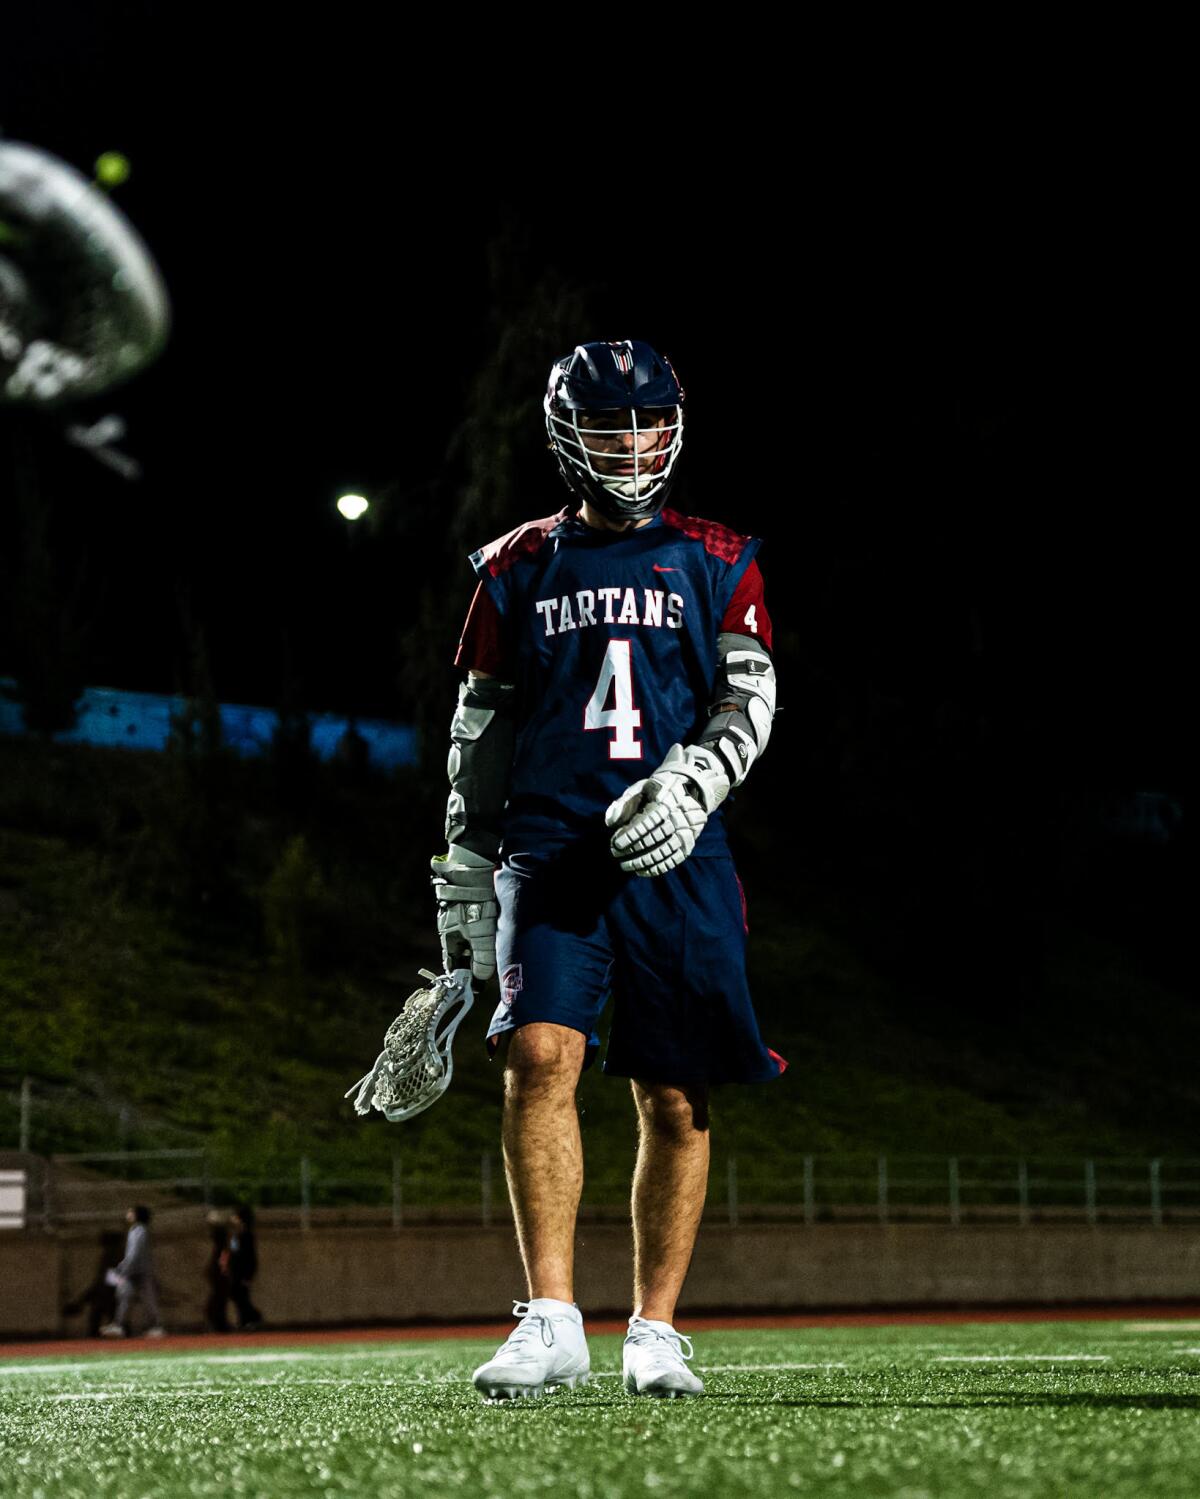 Austin Hicks of St. Margaret's is ranked as the top lacrosse player in California.